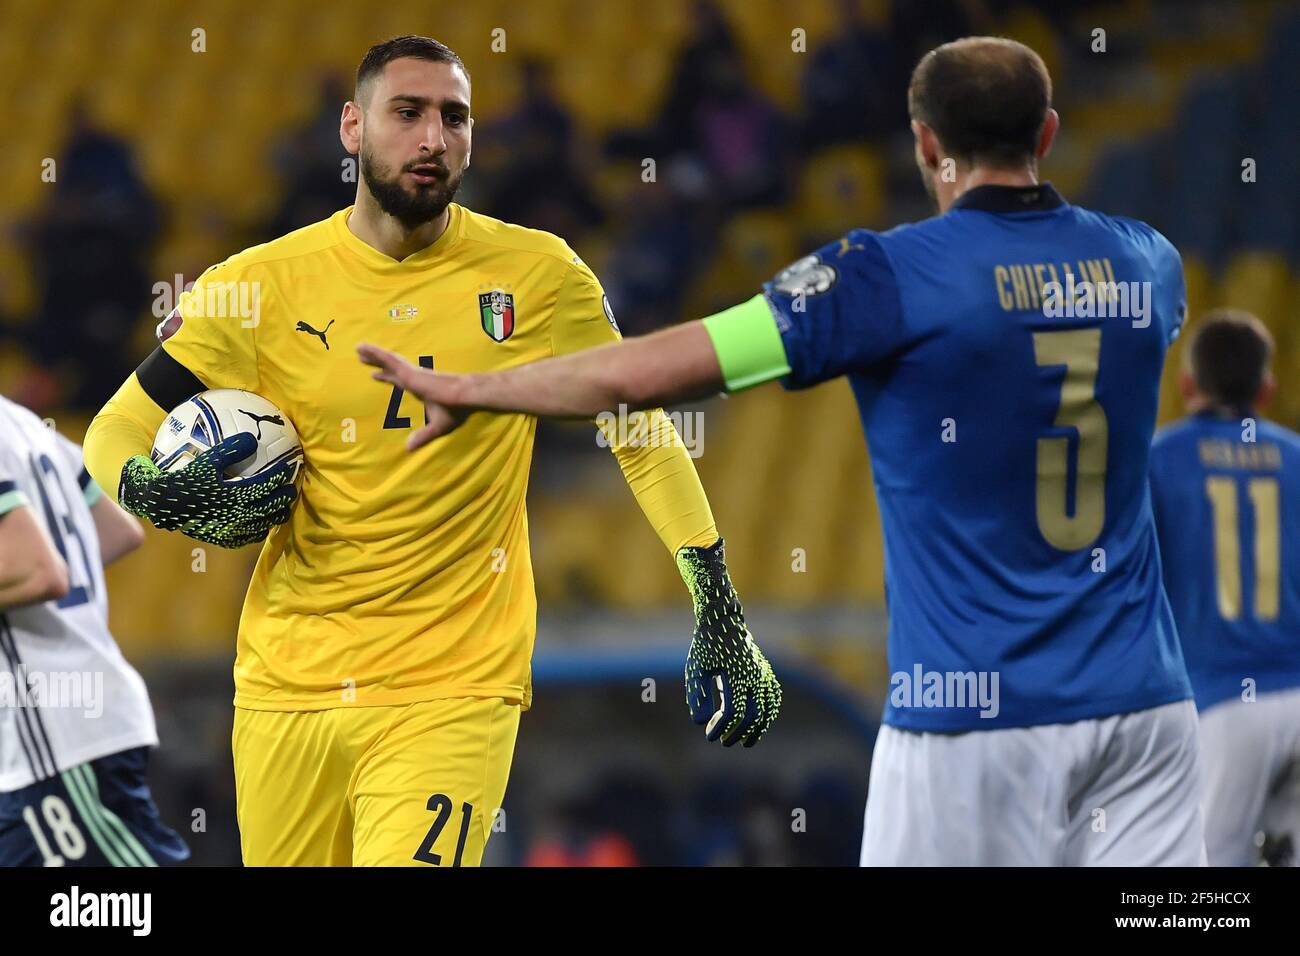 Parma, Italy. 25th Mar, 2021. Gianluigi Donnarumma and Giorgio Chiellini of Italy in action during the FIFA World Cup 2022 qualification football match between Italy and Northerrn Ireland at stadio Ennio Tardini in Parma (Italy), March 25th, 2021. Photo Andrea Staccioli/Insidefoto Credit: insidefoto srl/Alamy Live News Stock Photo